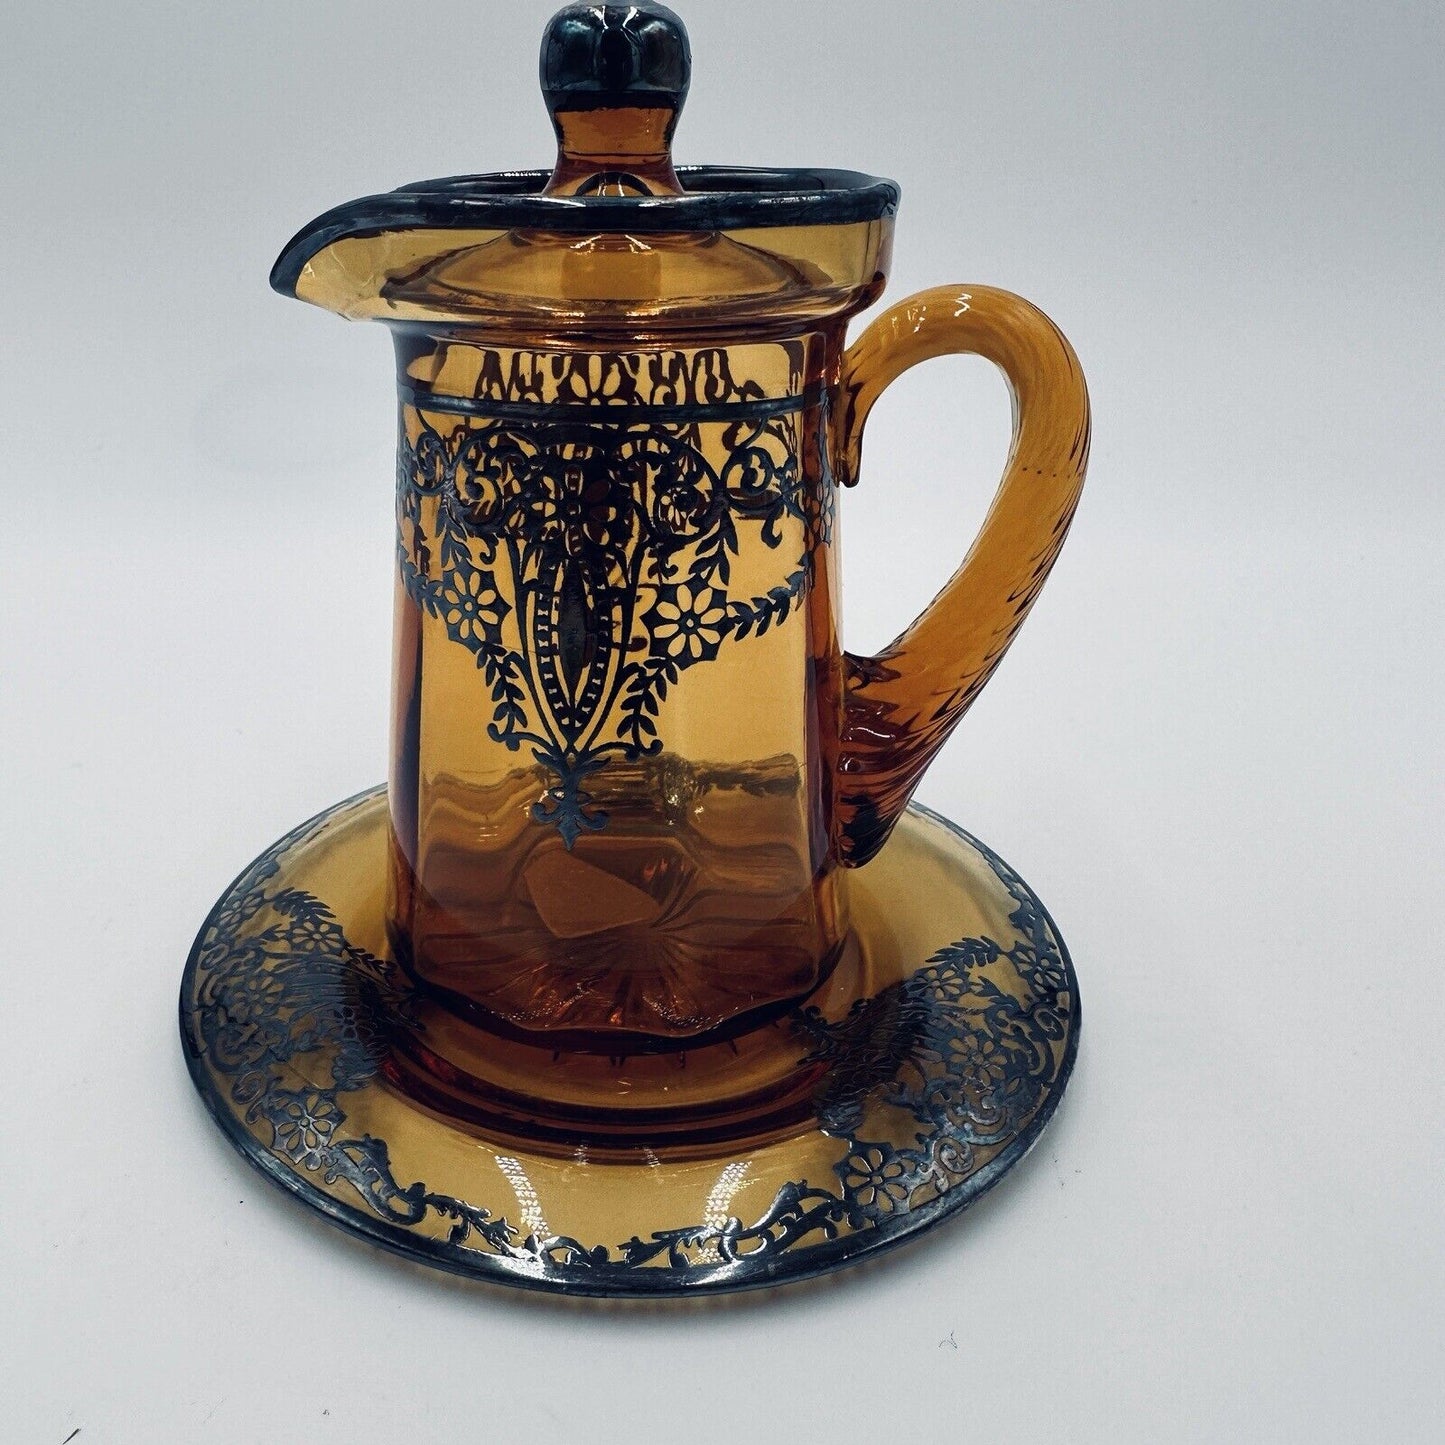 Amber Glass Lidded Pitcher and Saucer  with Sterling Silver Overlay Serveware